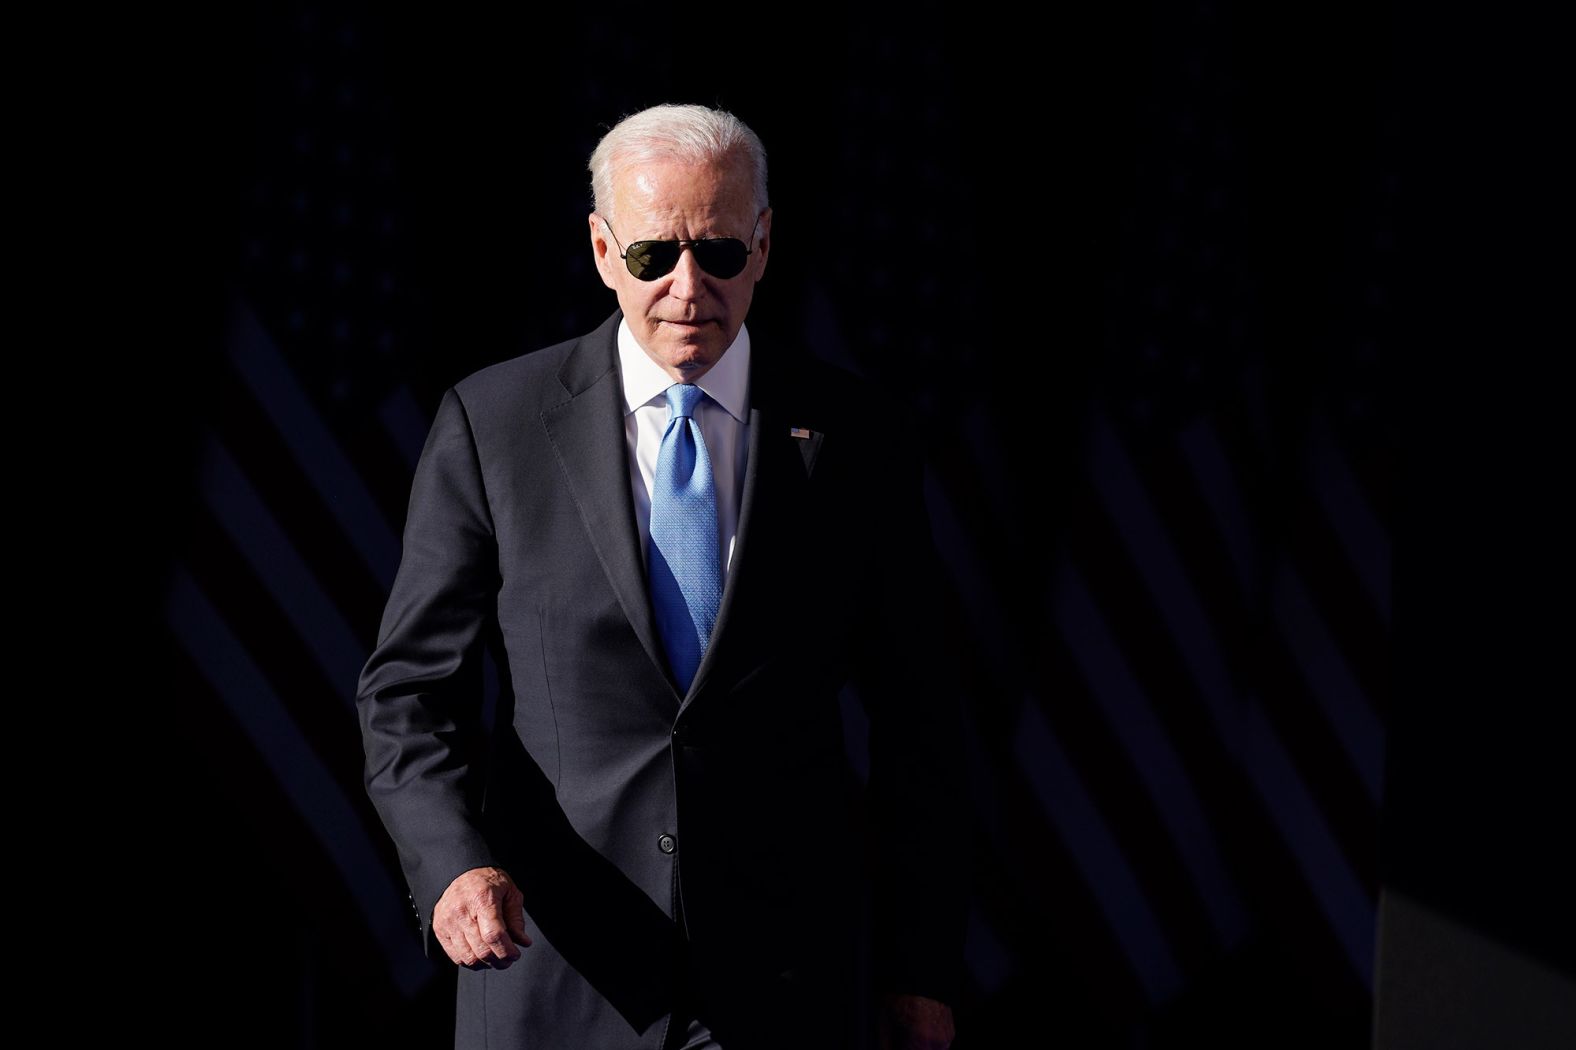 Biden arrives at his news conference wearing his trademark aviator sunglasses. He gifted Putin with a pair of custom aviators, <a href="index.php?page=&url=https%3A%2F%2Fwww.cnn.com%2Fworld%2Flive-news%2Fbiden-putin-meeting-geneva-updates-intl%2Fh_33bb3759bf0393d6bad1f45938962f40" target="_blank">according to a White House official.</a>